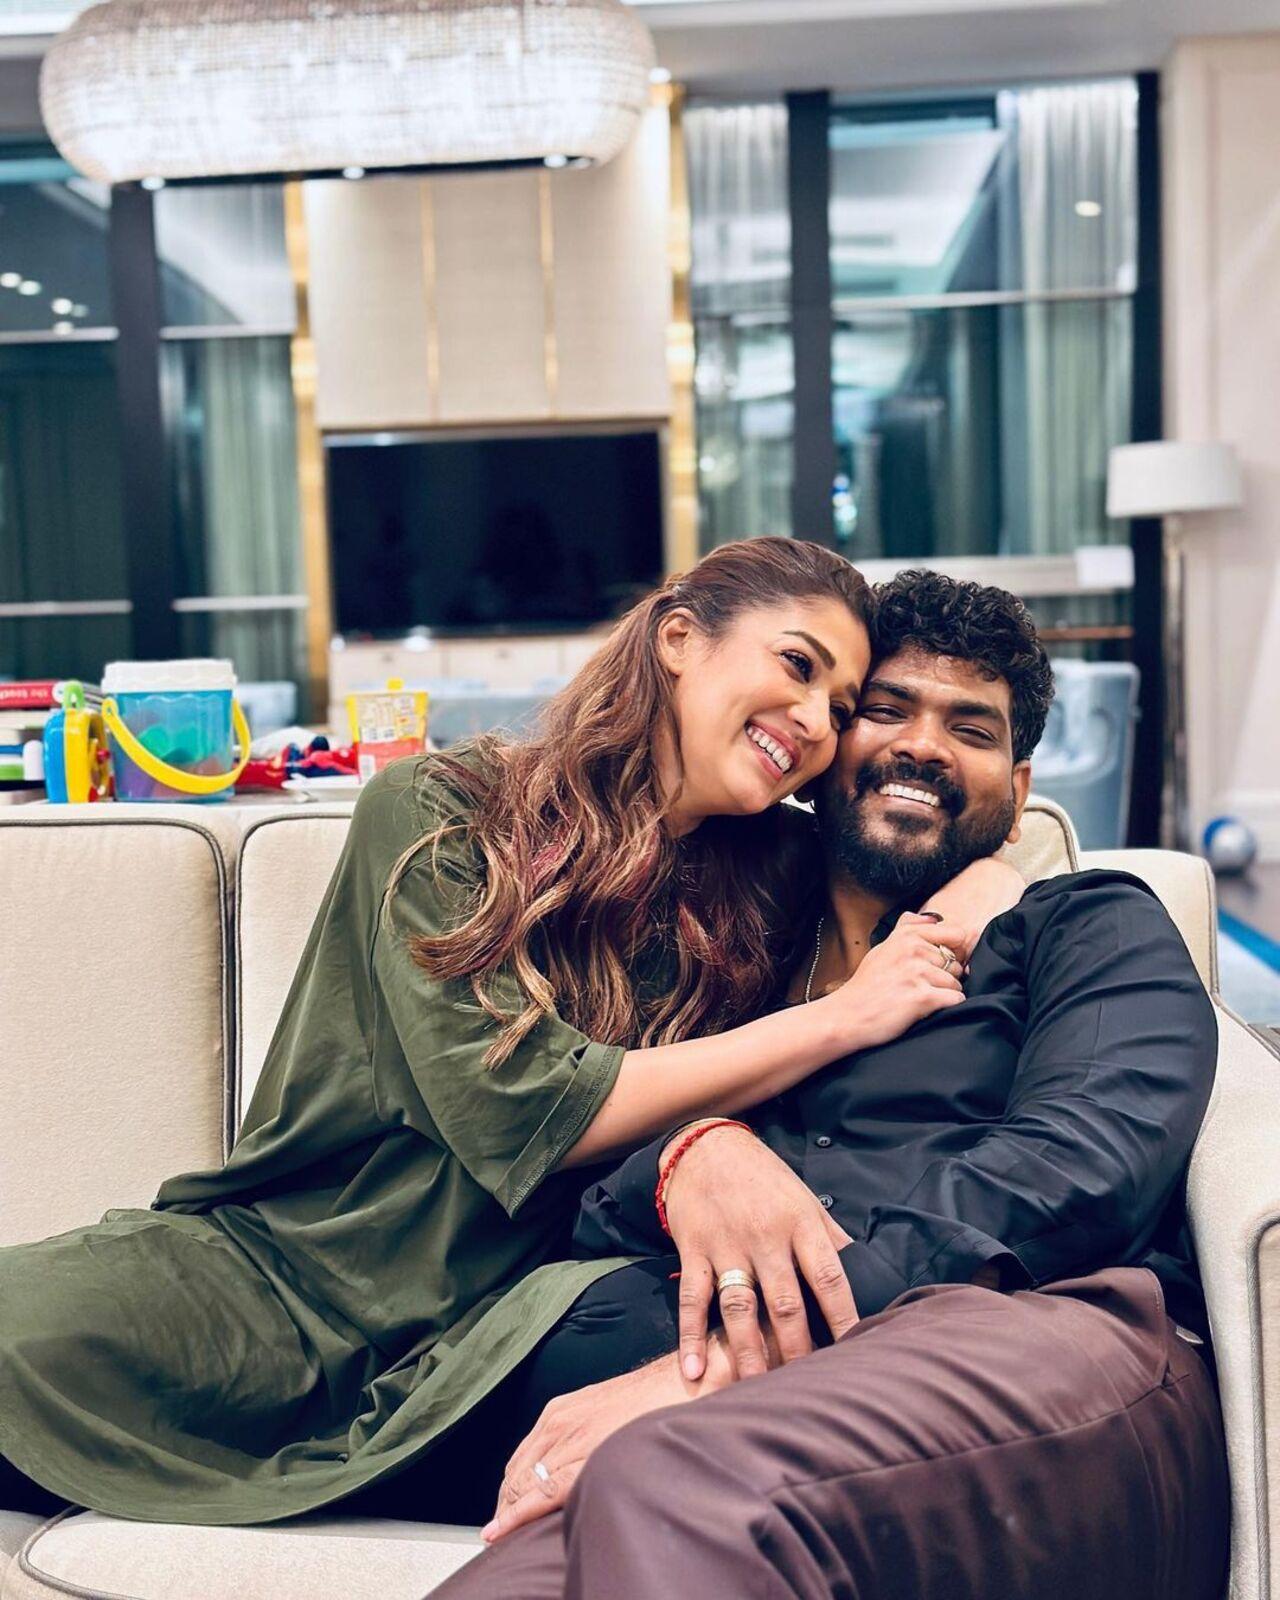 After being discrete about their relationship at one point, Vignesh would often share pictures with his 'thangame' on Instagram